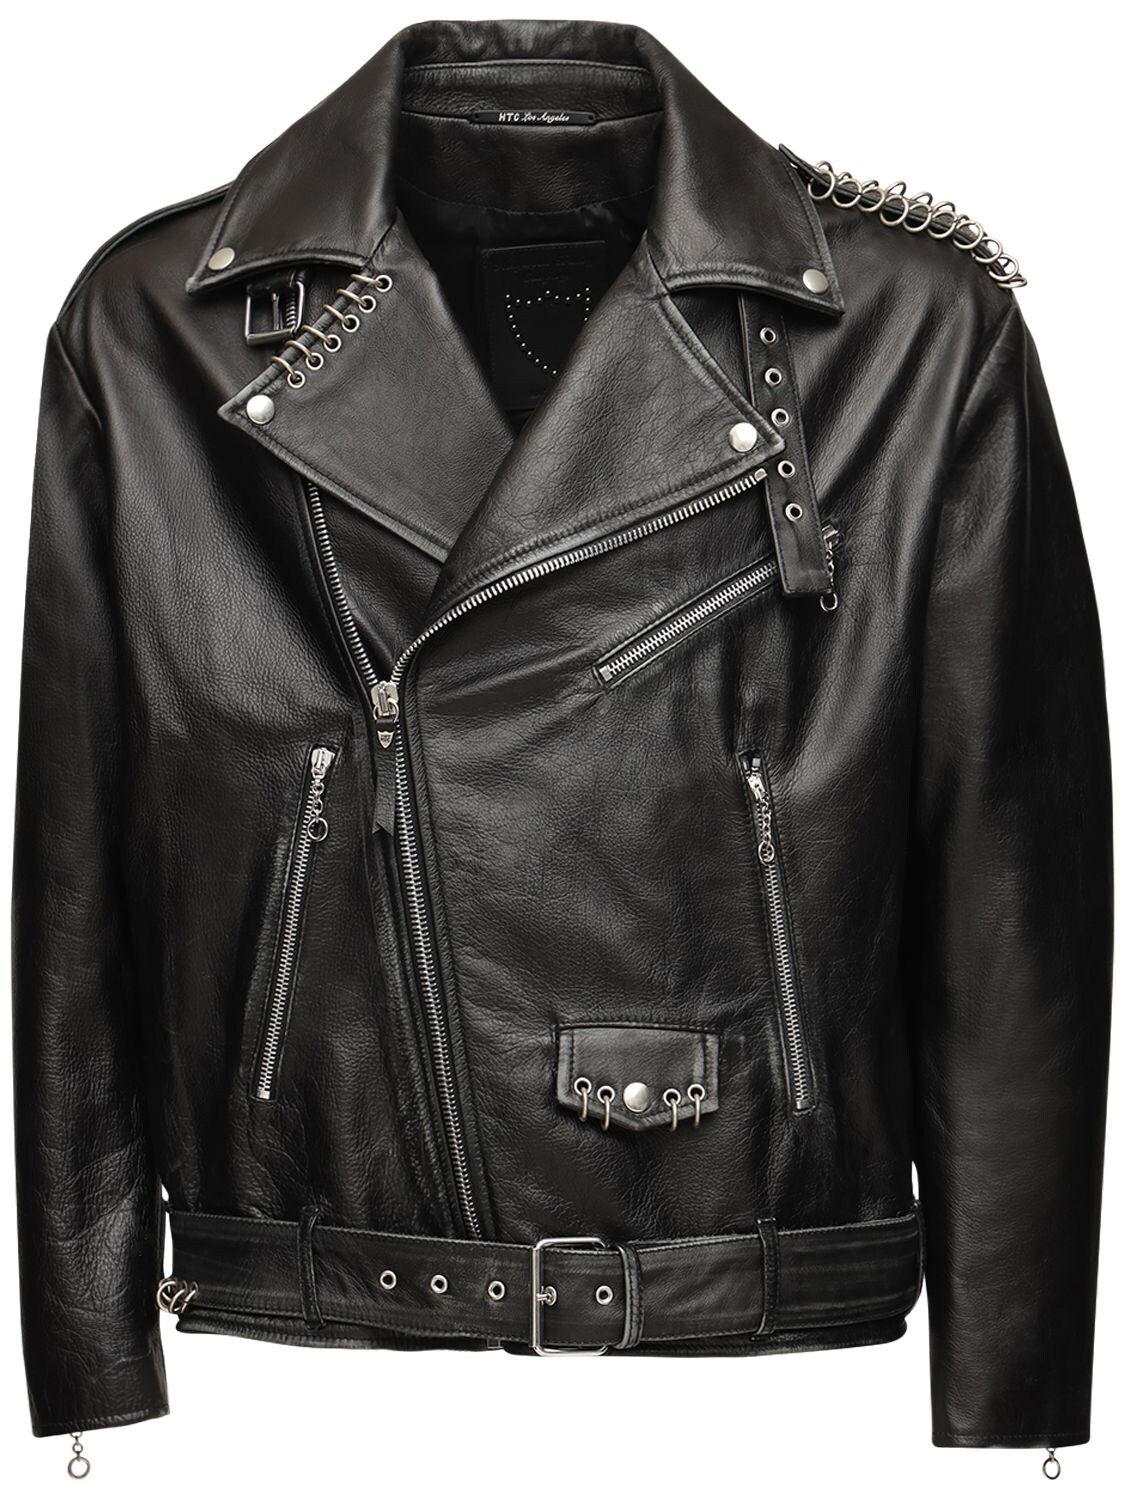 Htc Los Angeles Oversized Leather Jacket W/ Metal Rings In Black,white